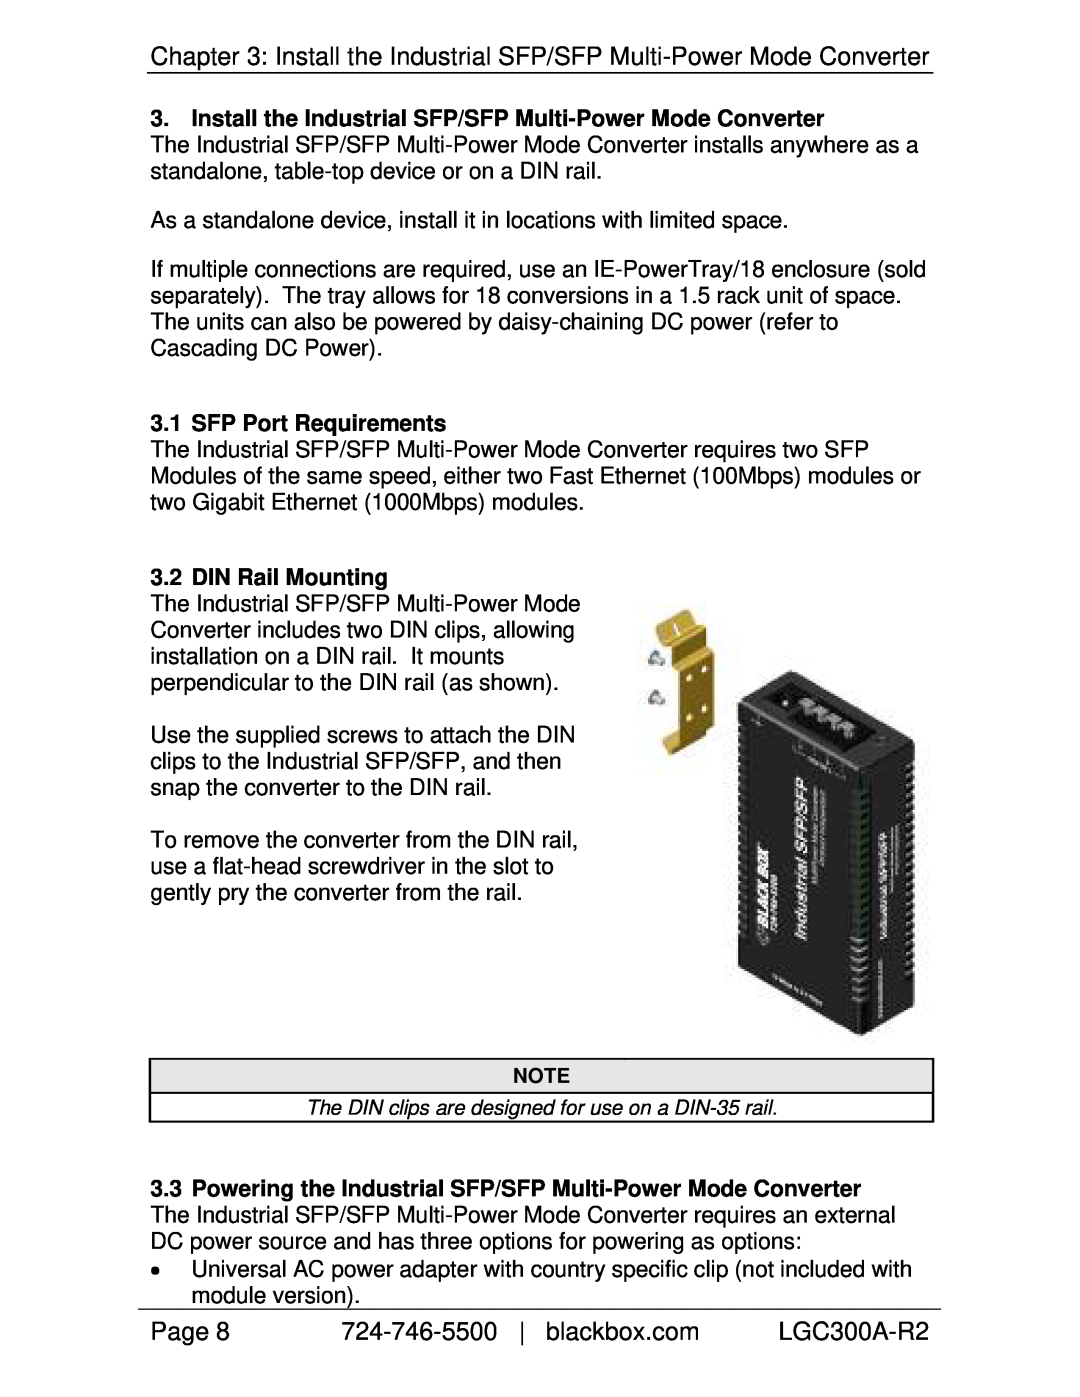 Black Box LGC300A-R2 Install the Industrial SFP/SFP Multi-Power Mode Converter, SFP Port Requirements, DIN Rail Mounting 